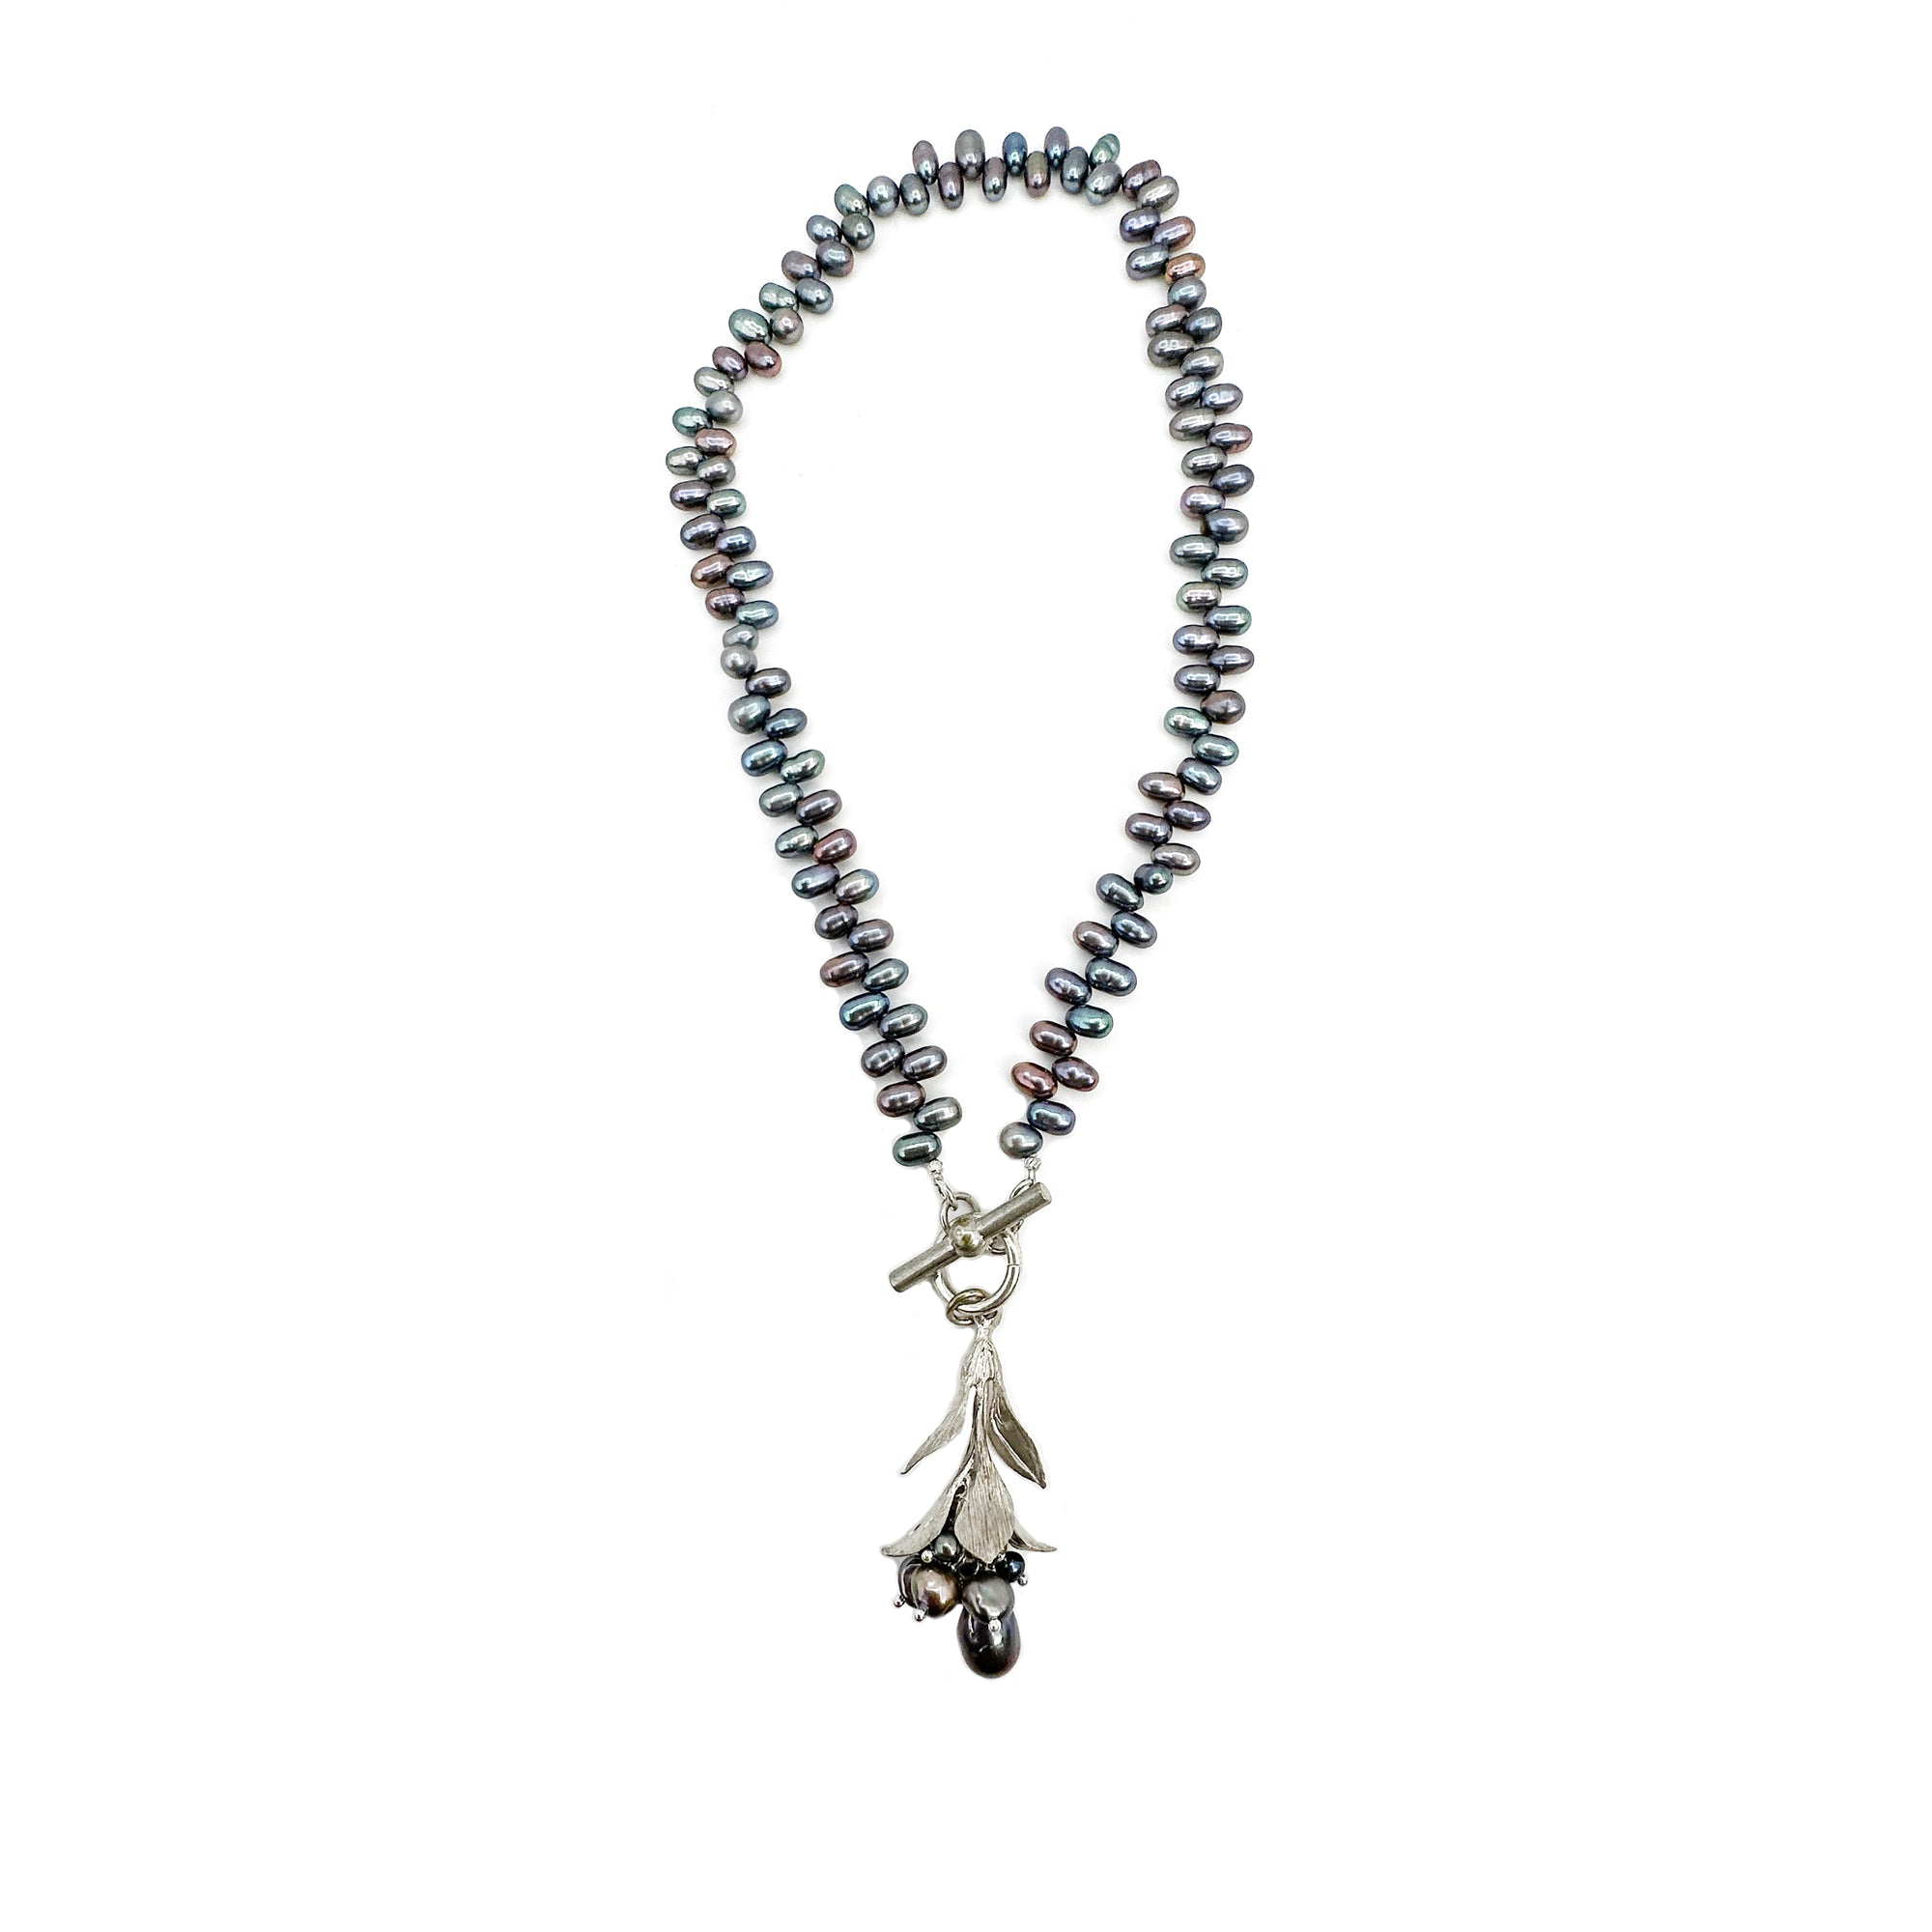 Pearl Necklace with Bud Pendant